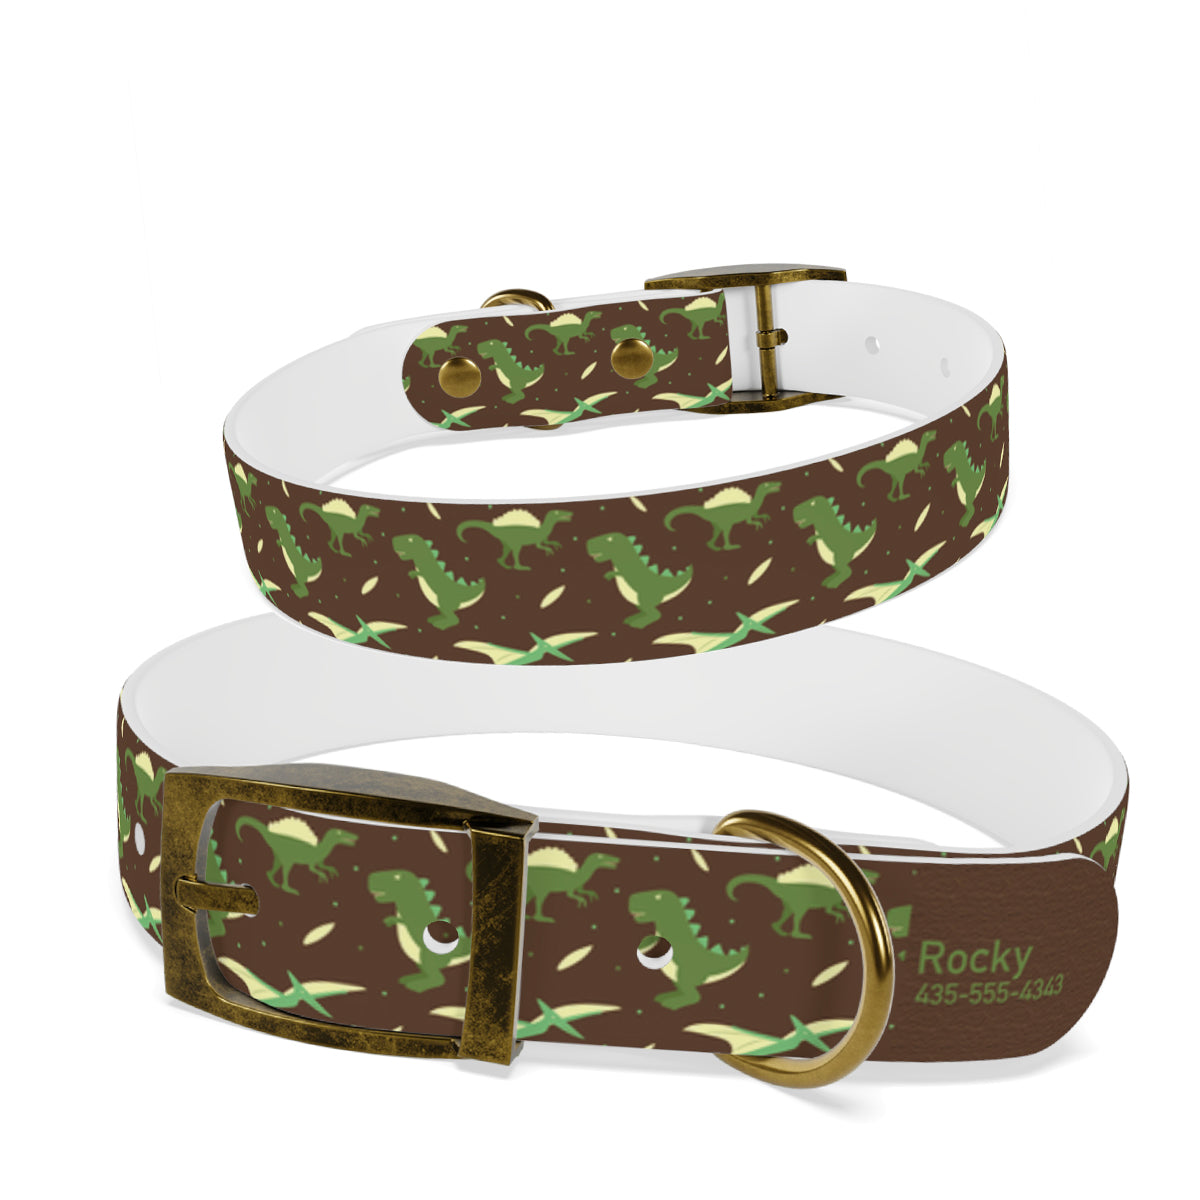 Personalized Dinosaur Dog Collar | Antimicrobial, Waterproof & Odor Resistant